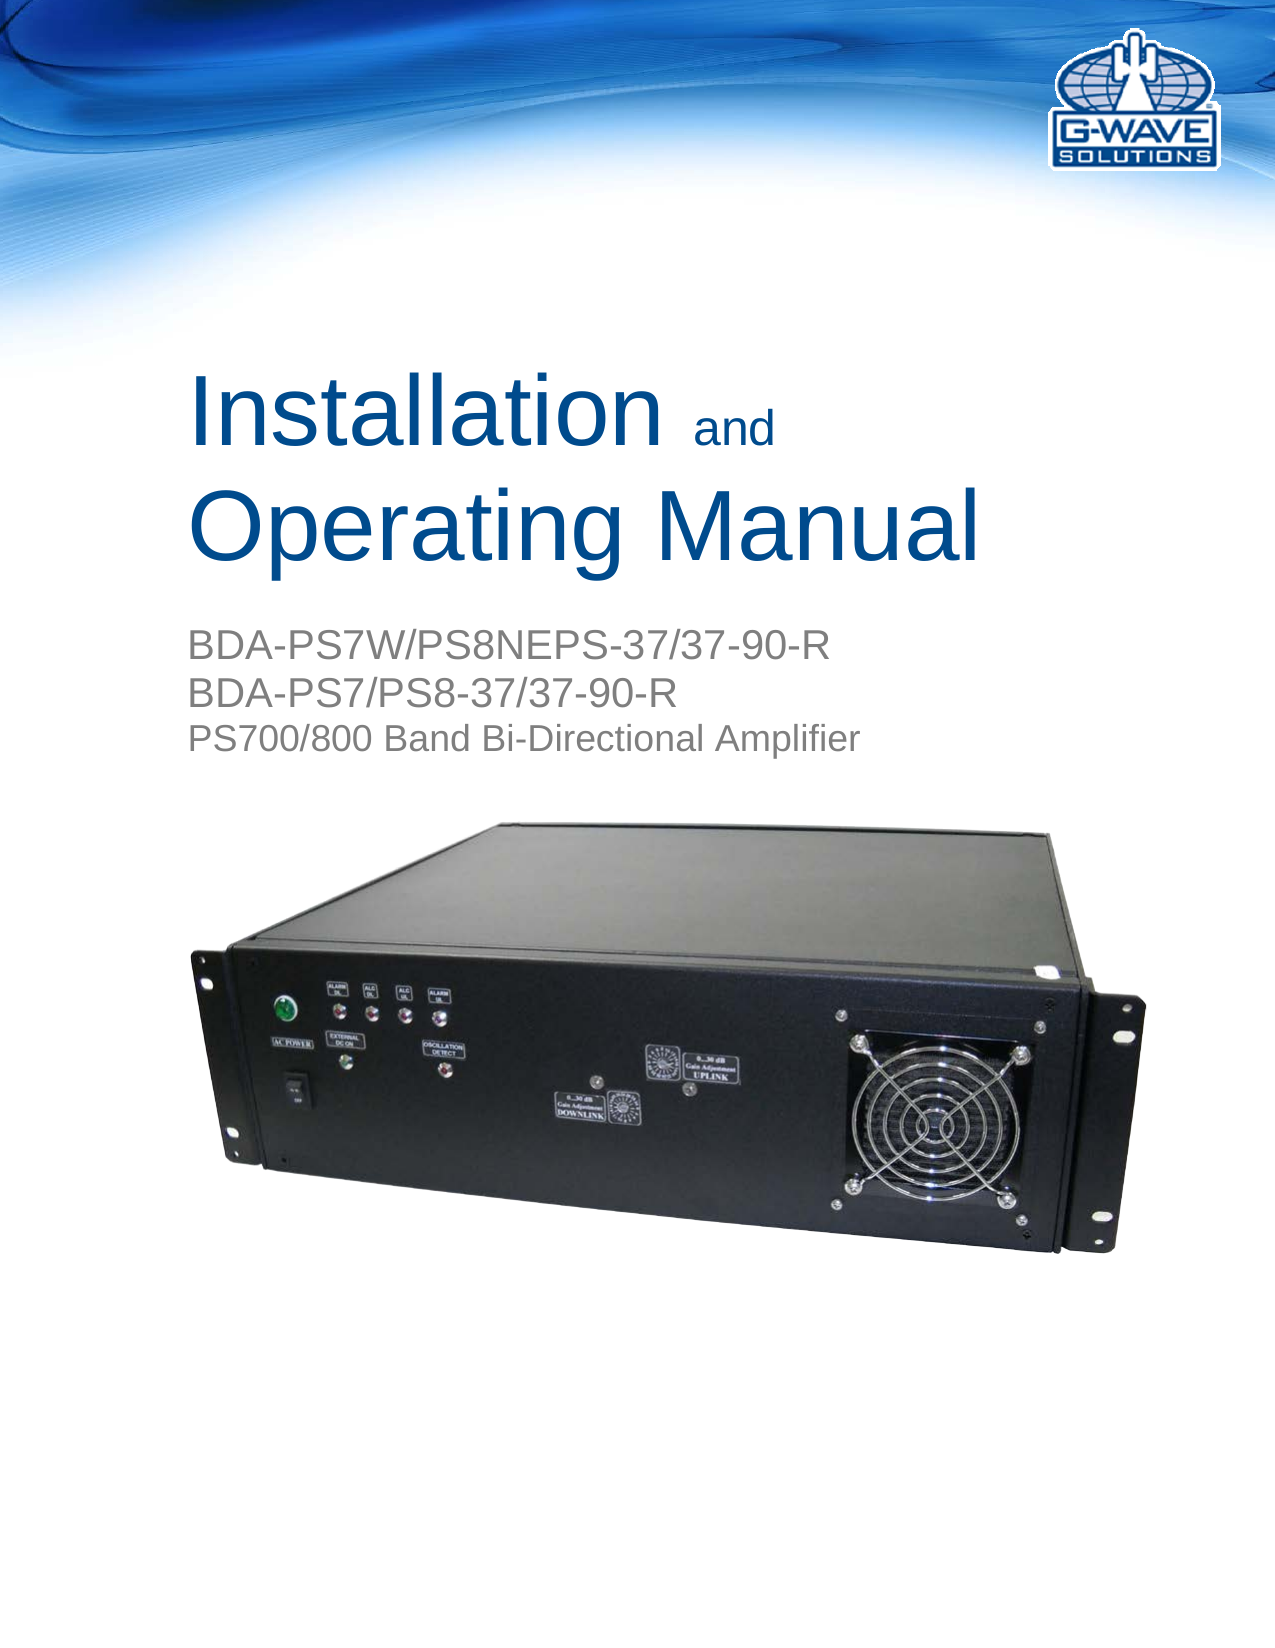       Installation and Operating Manual   BDA-PS7W/PS8NEPS-37/37-90-R BDA-PS7/PS8-37/37-90-R  PS700/800 Band Bi-Directional Amplifier     